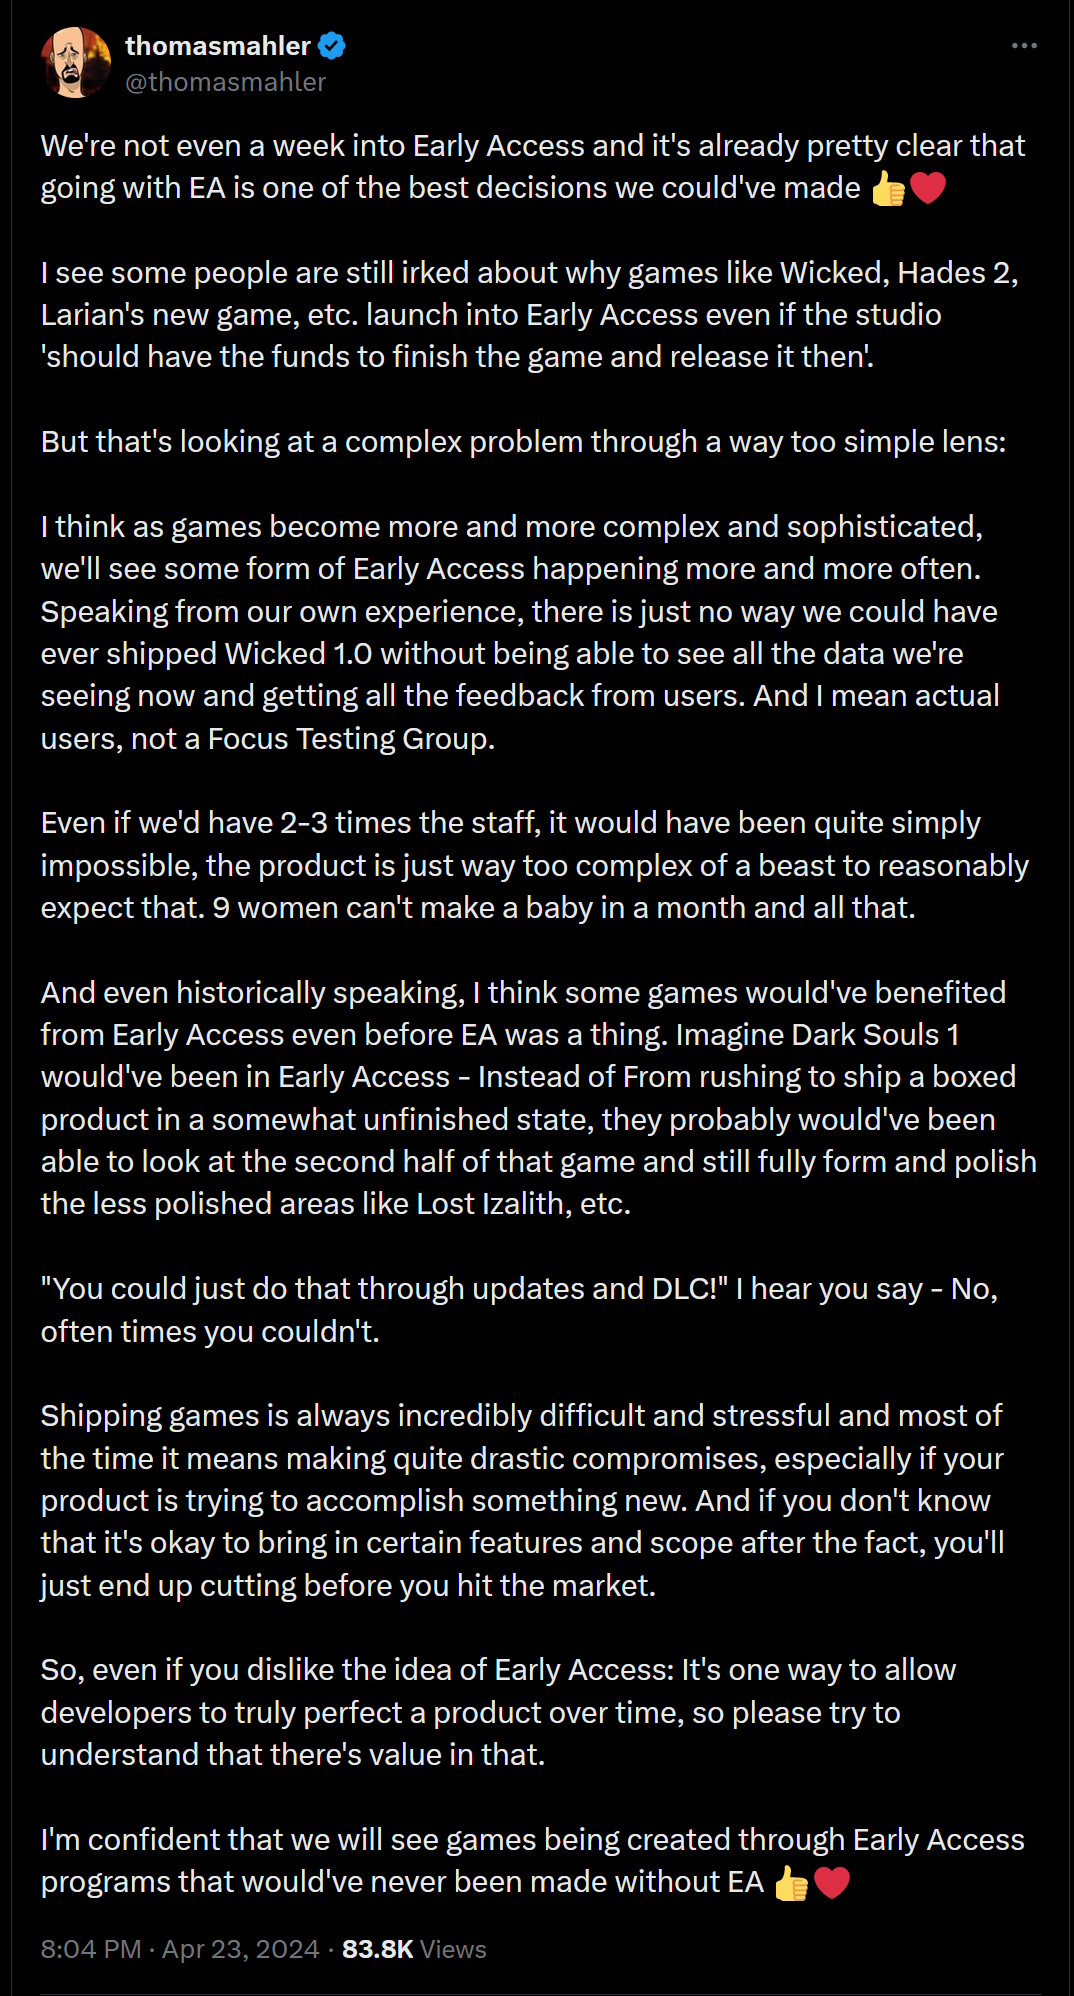 We're not even a week into Early Access and it's already pretty clear that going with EA is one of the best decisions we could've made ????❤️  I see some people are still irked about why games like Wicked, Hades 2, Larian's new game, etc. launch into Early Access even if the studio 'should have the funds to finish the game and release it then'.  But that's looking at a complex problem through a way too simple lens:  I think as games become more and more complex and sophisticated, we'll see some form of Early Access happening more and more often. Speaking from our own experience, there is just no way we could have ever shipped Wicked 1.0 without being able to see all the data we're seeing now and getting all the feedback from users. And I mean actual users, not a Focus Testing Group.  Even if we'd have 2-3 times the staff, it would have been quite simply impossible, the product is just way too complex of a beast to reasonably expect that. 9 women can't make a baby in a month and all that.  And even historically speaking, I think some games would've benefited from Early Access even before EA was a thing. Imagine Dark Souls 1 would've been in Early Access - Instead of From rushing to ship a boxed product in a somewhat unfinished state, they probably would've been able to look at the second half of that game and still fully form and polish the less polished areas like Lost Izalith, etc.  